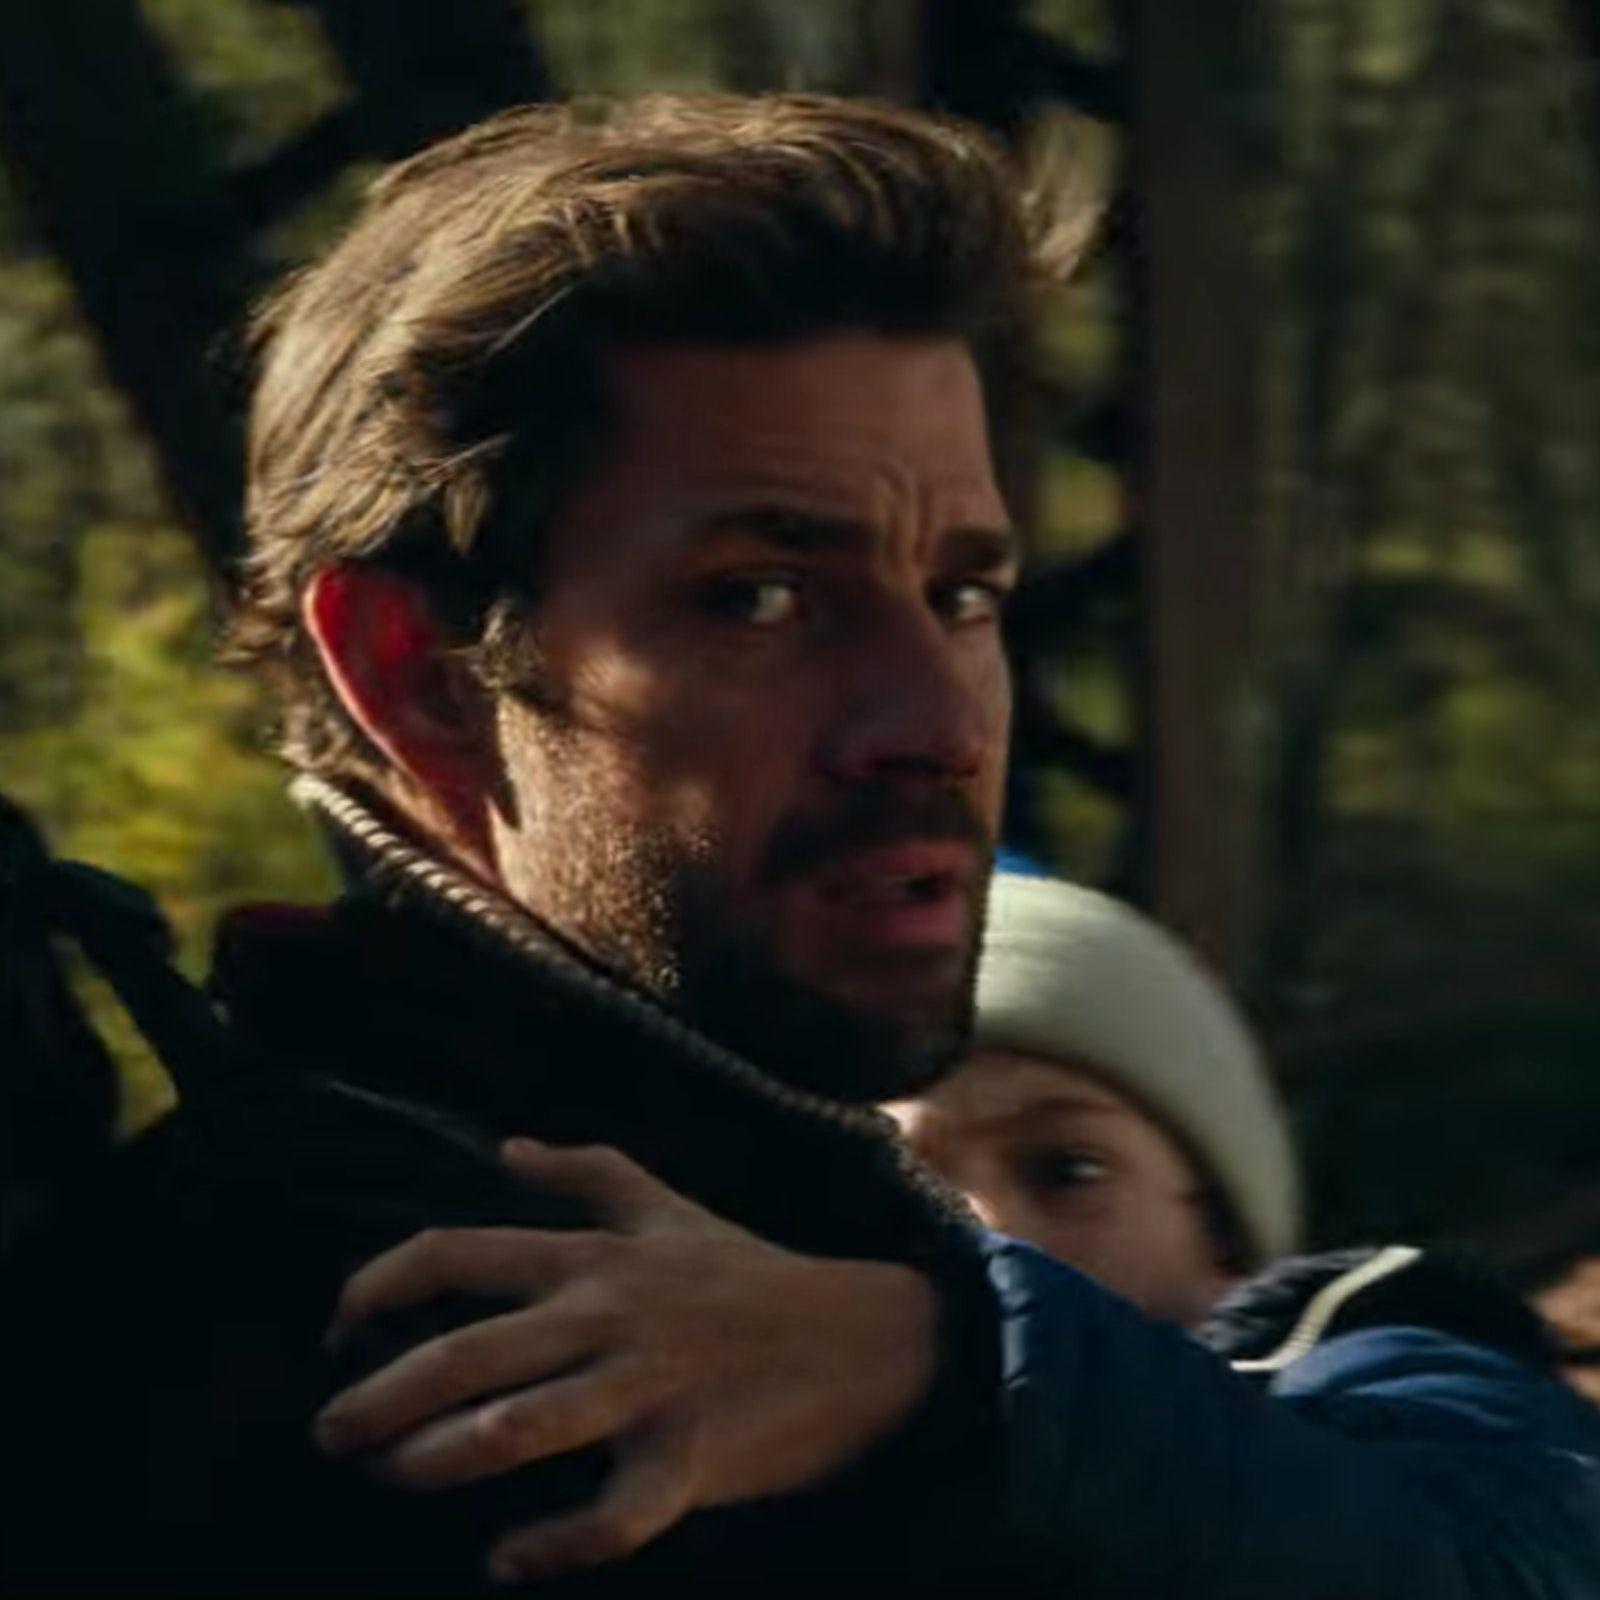 Super Bowl Movie Trailers ‘A Quiet Place’ Is Silent Horror